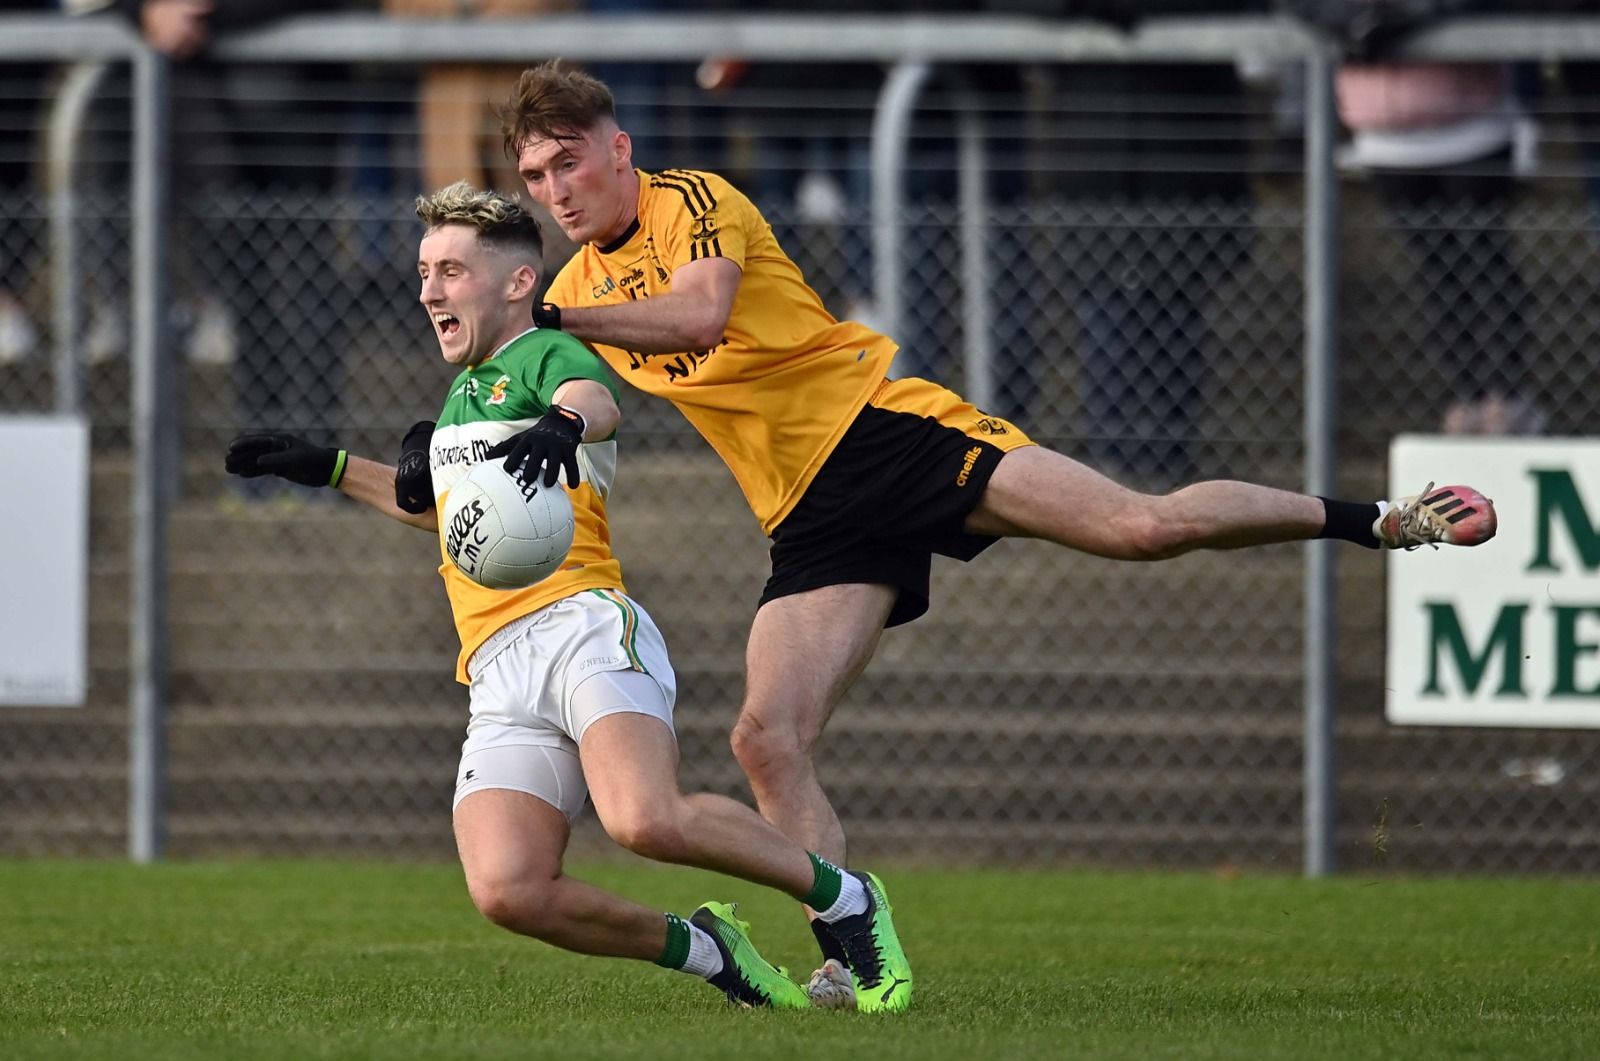 Carrickmore strike late in titanic tussle with Loughmacrory